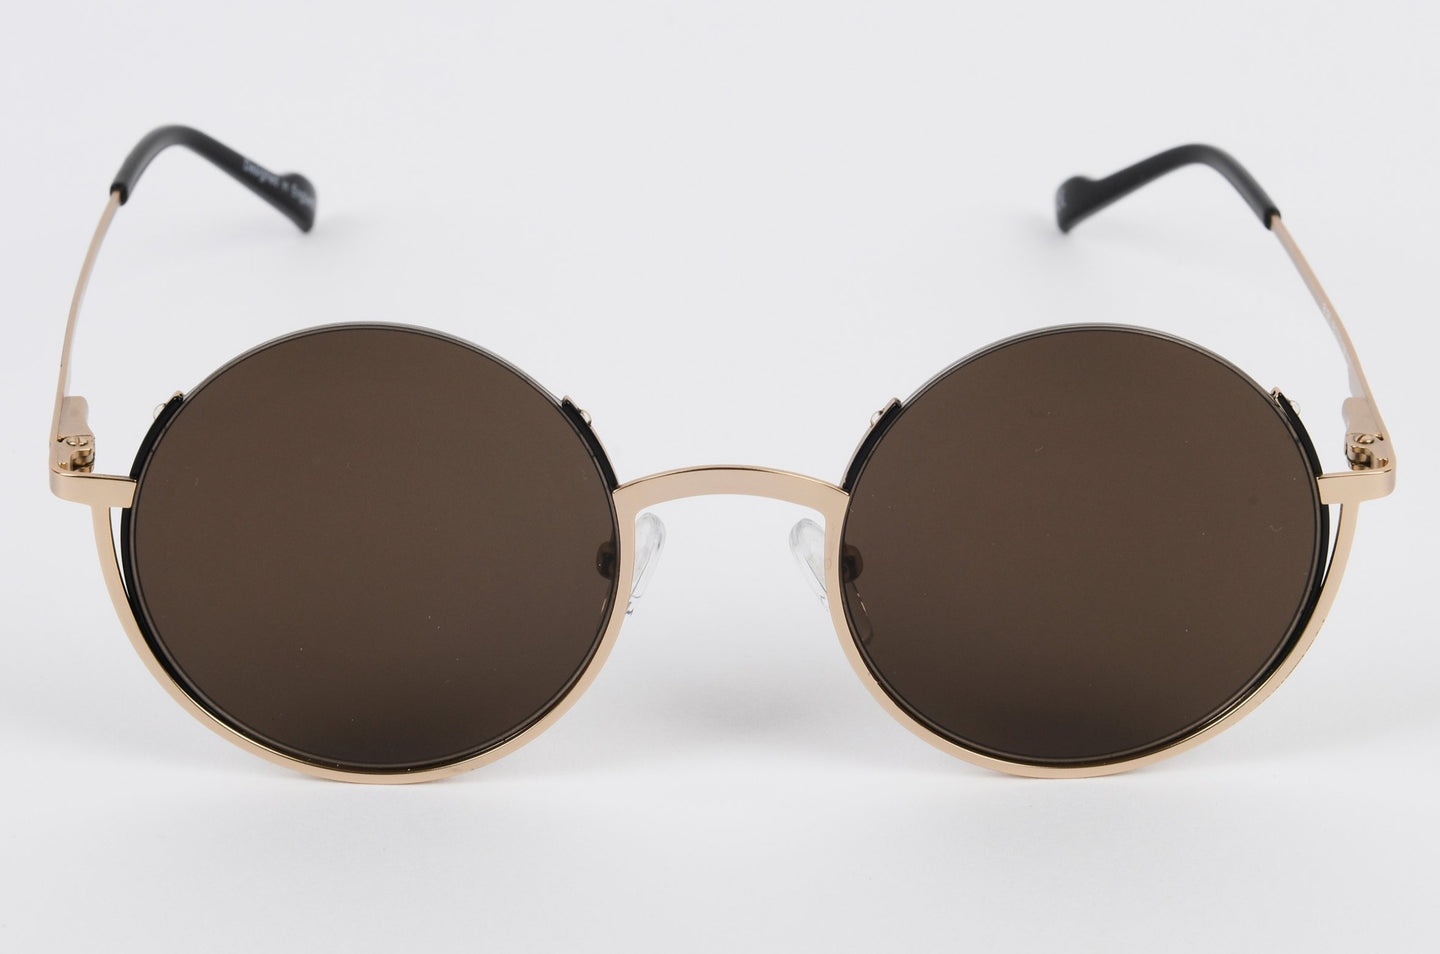 Round prescription sunglasses in gold colour with brown tint